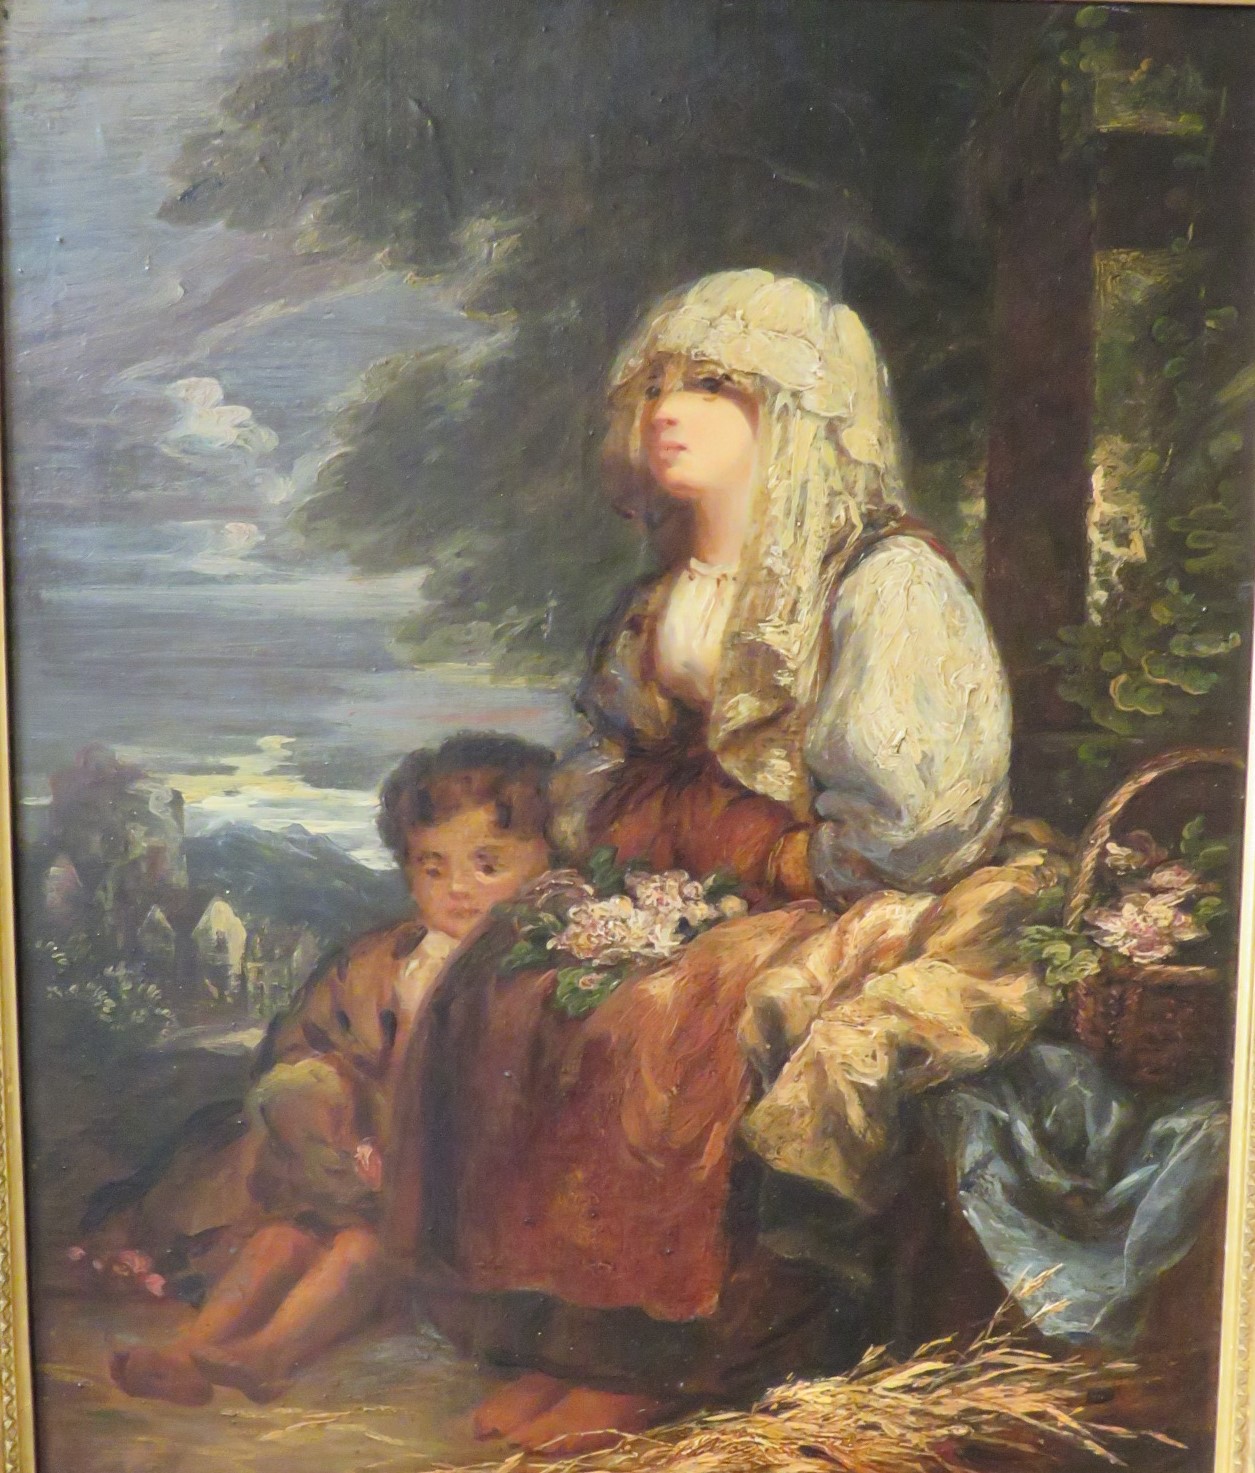 Blind woman and child, oil on canvas, (45cm x 37cm), indistinctly dated lower right 18?? [see